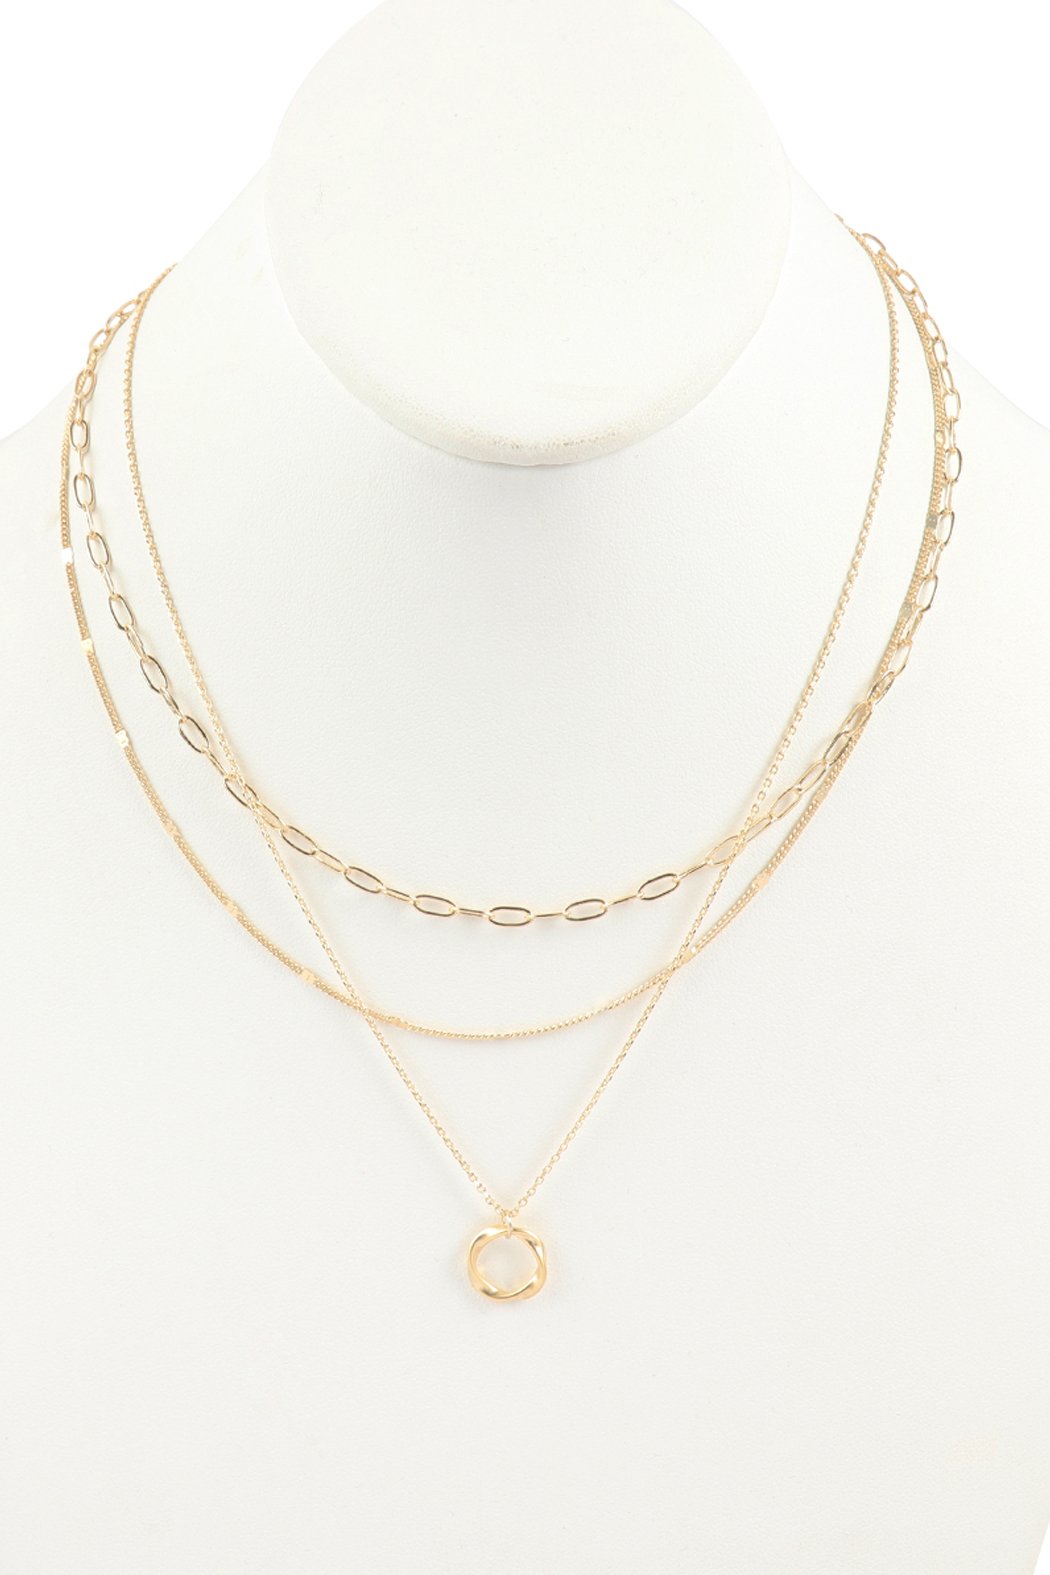 Multi Layer Chain With Round Necklace - LOLA LUXE